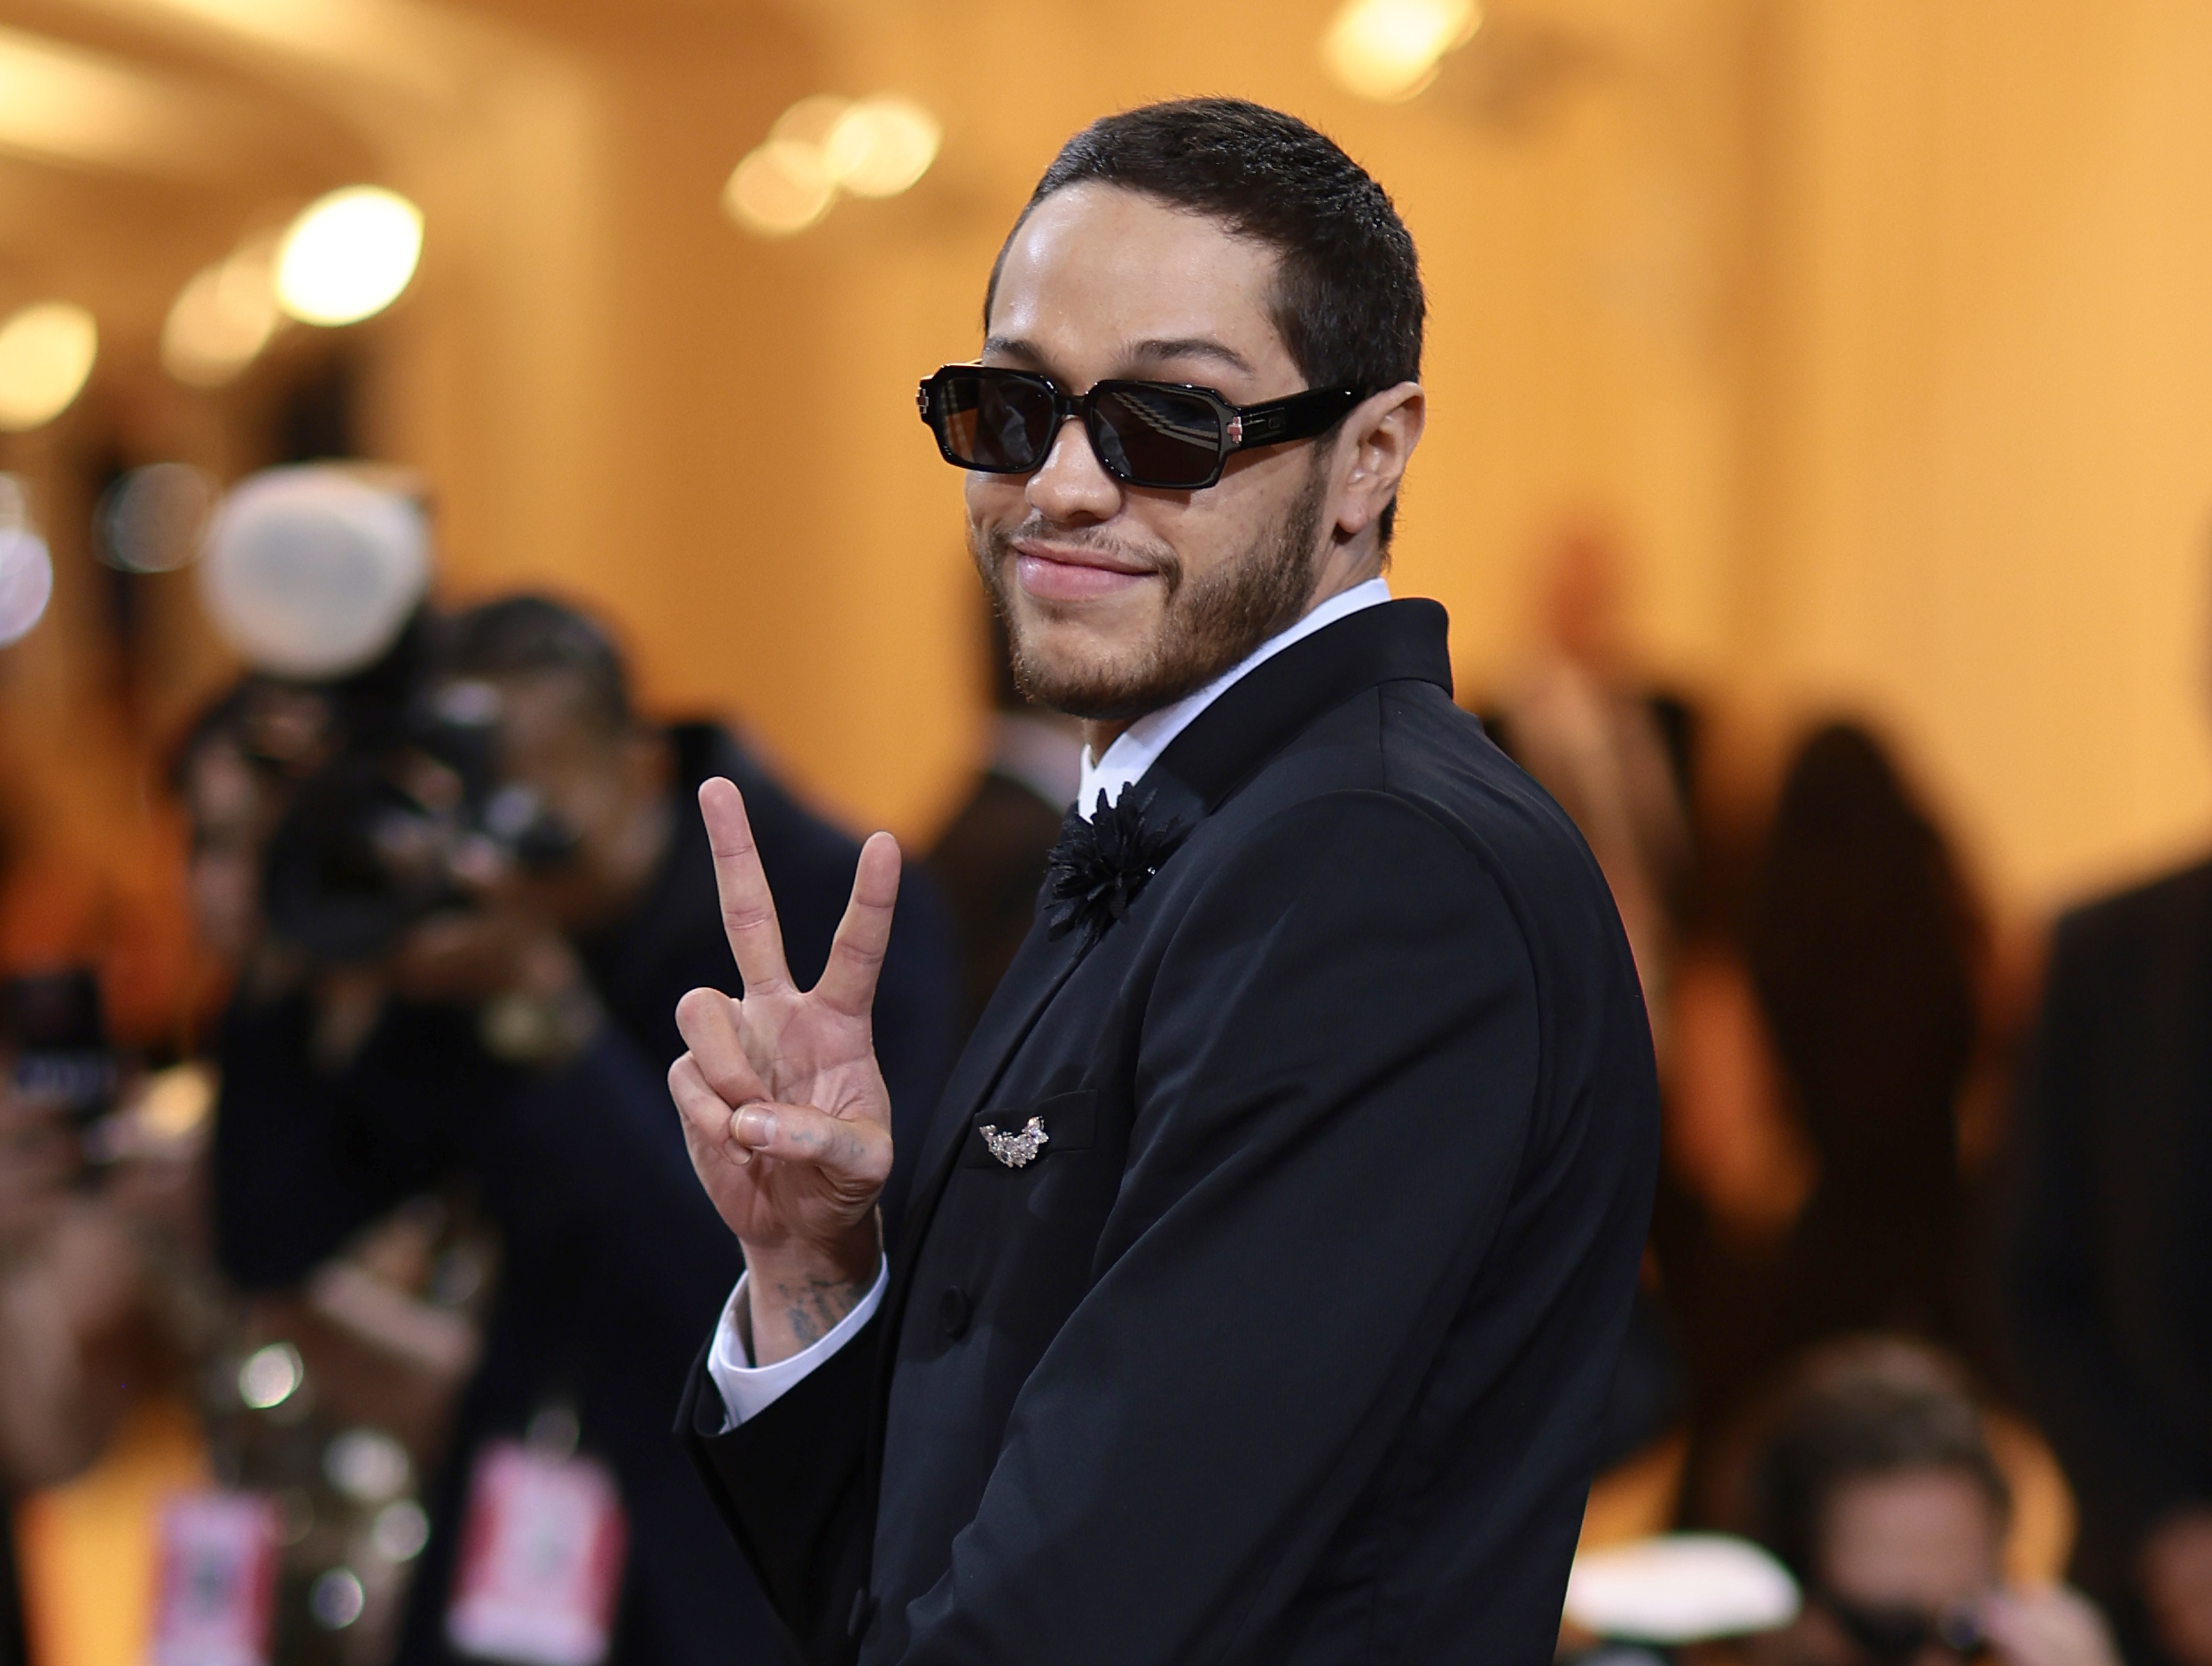 Pete Davidson attends The 2022 Met Gala while wearing sunglasses and making the peace sign.